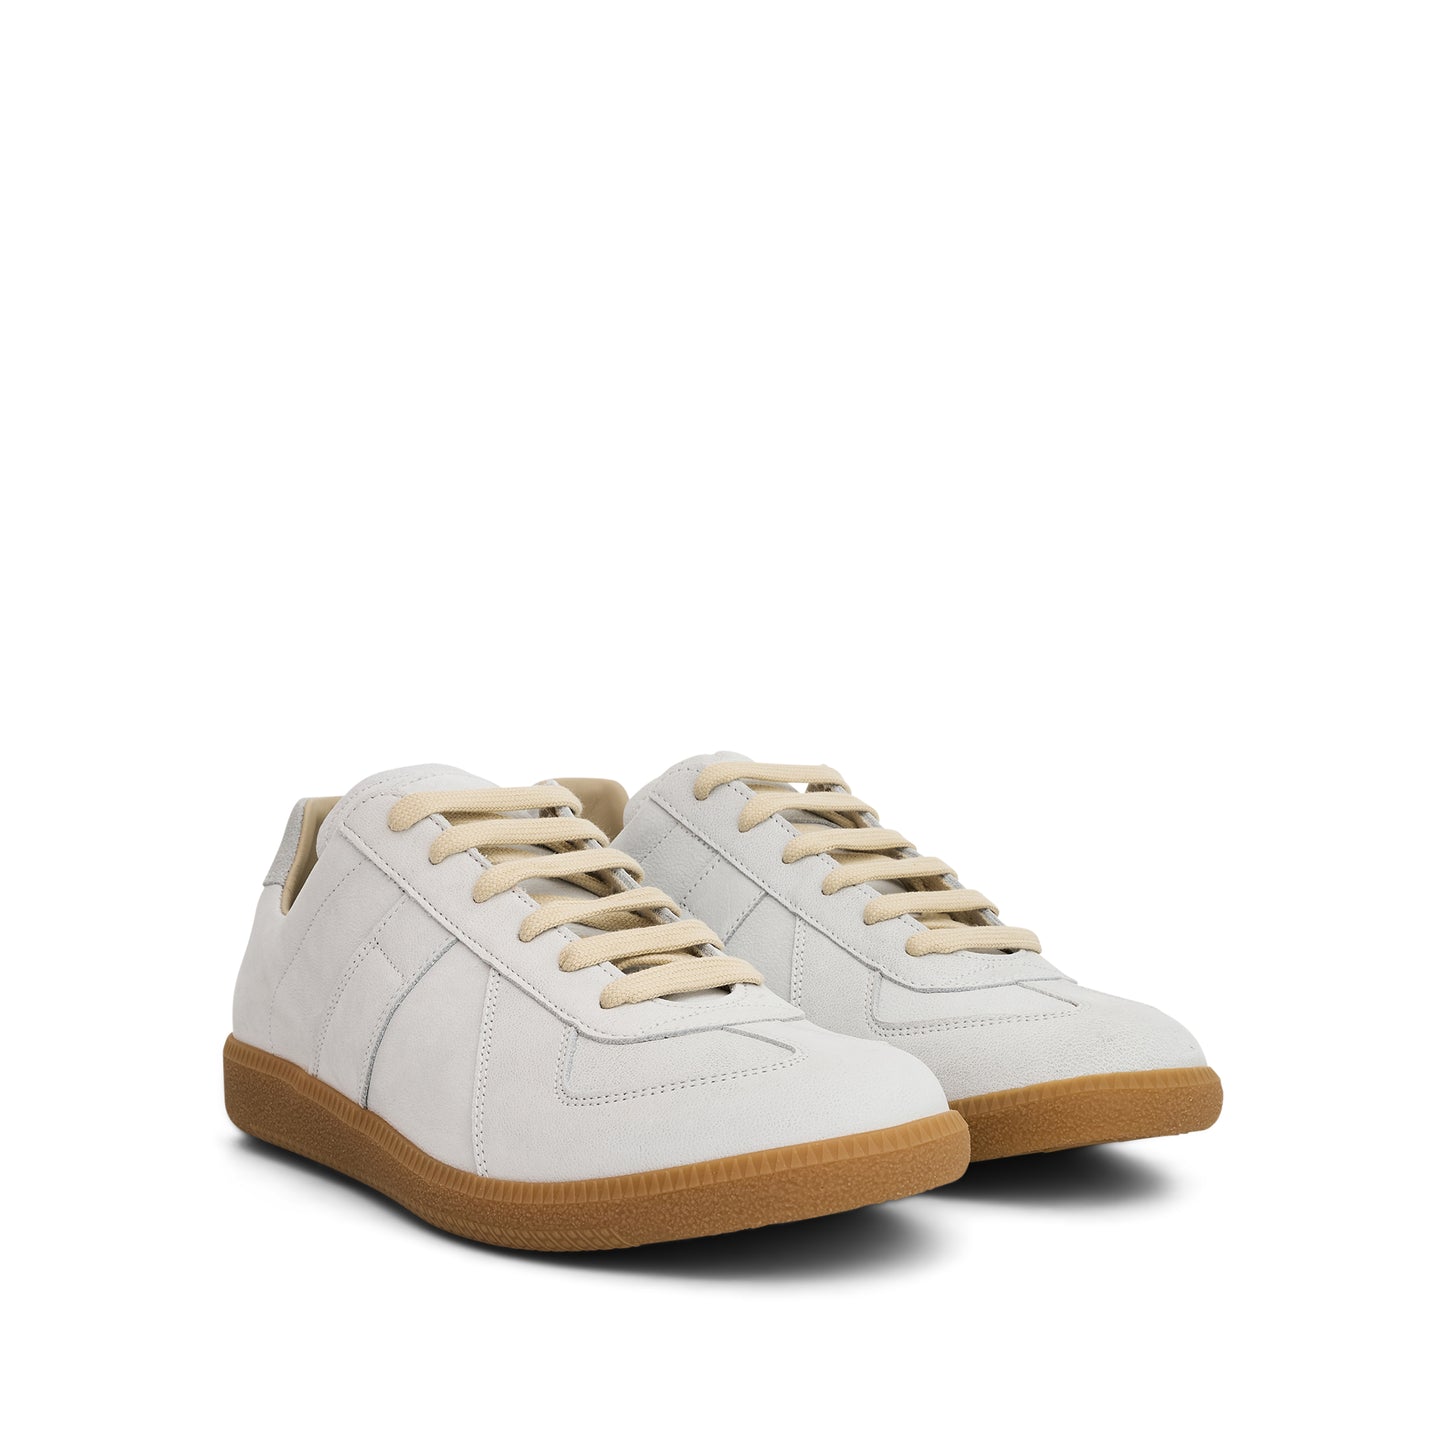 Replica Leather Sneakers in Light Grey